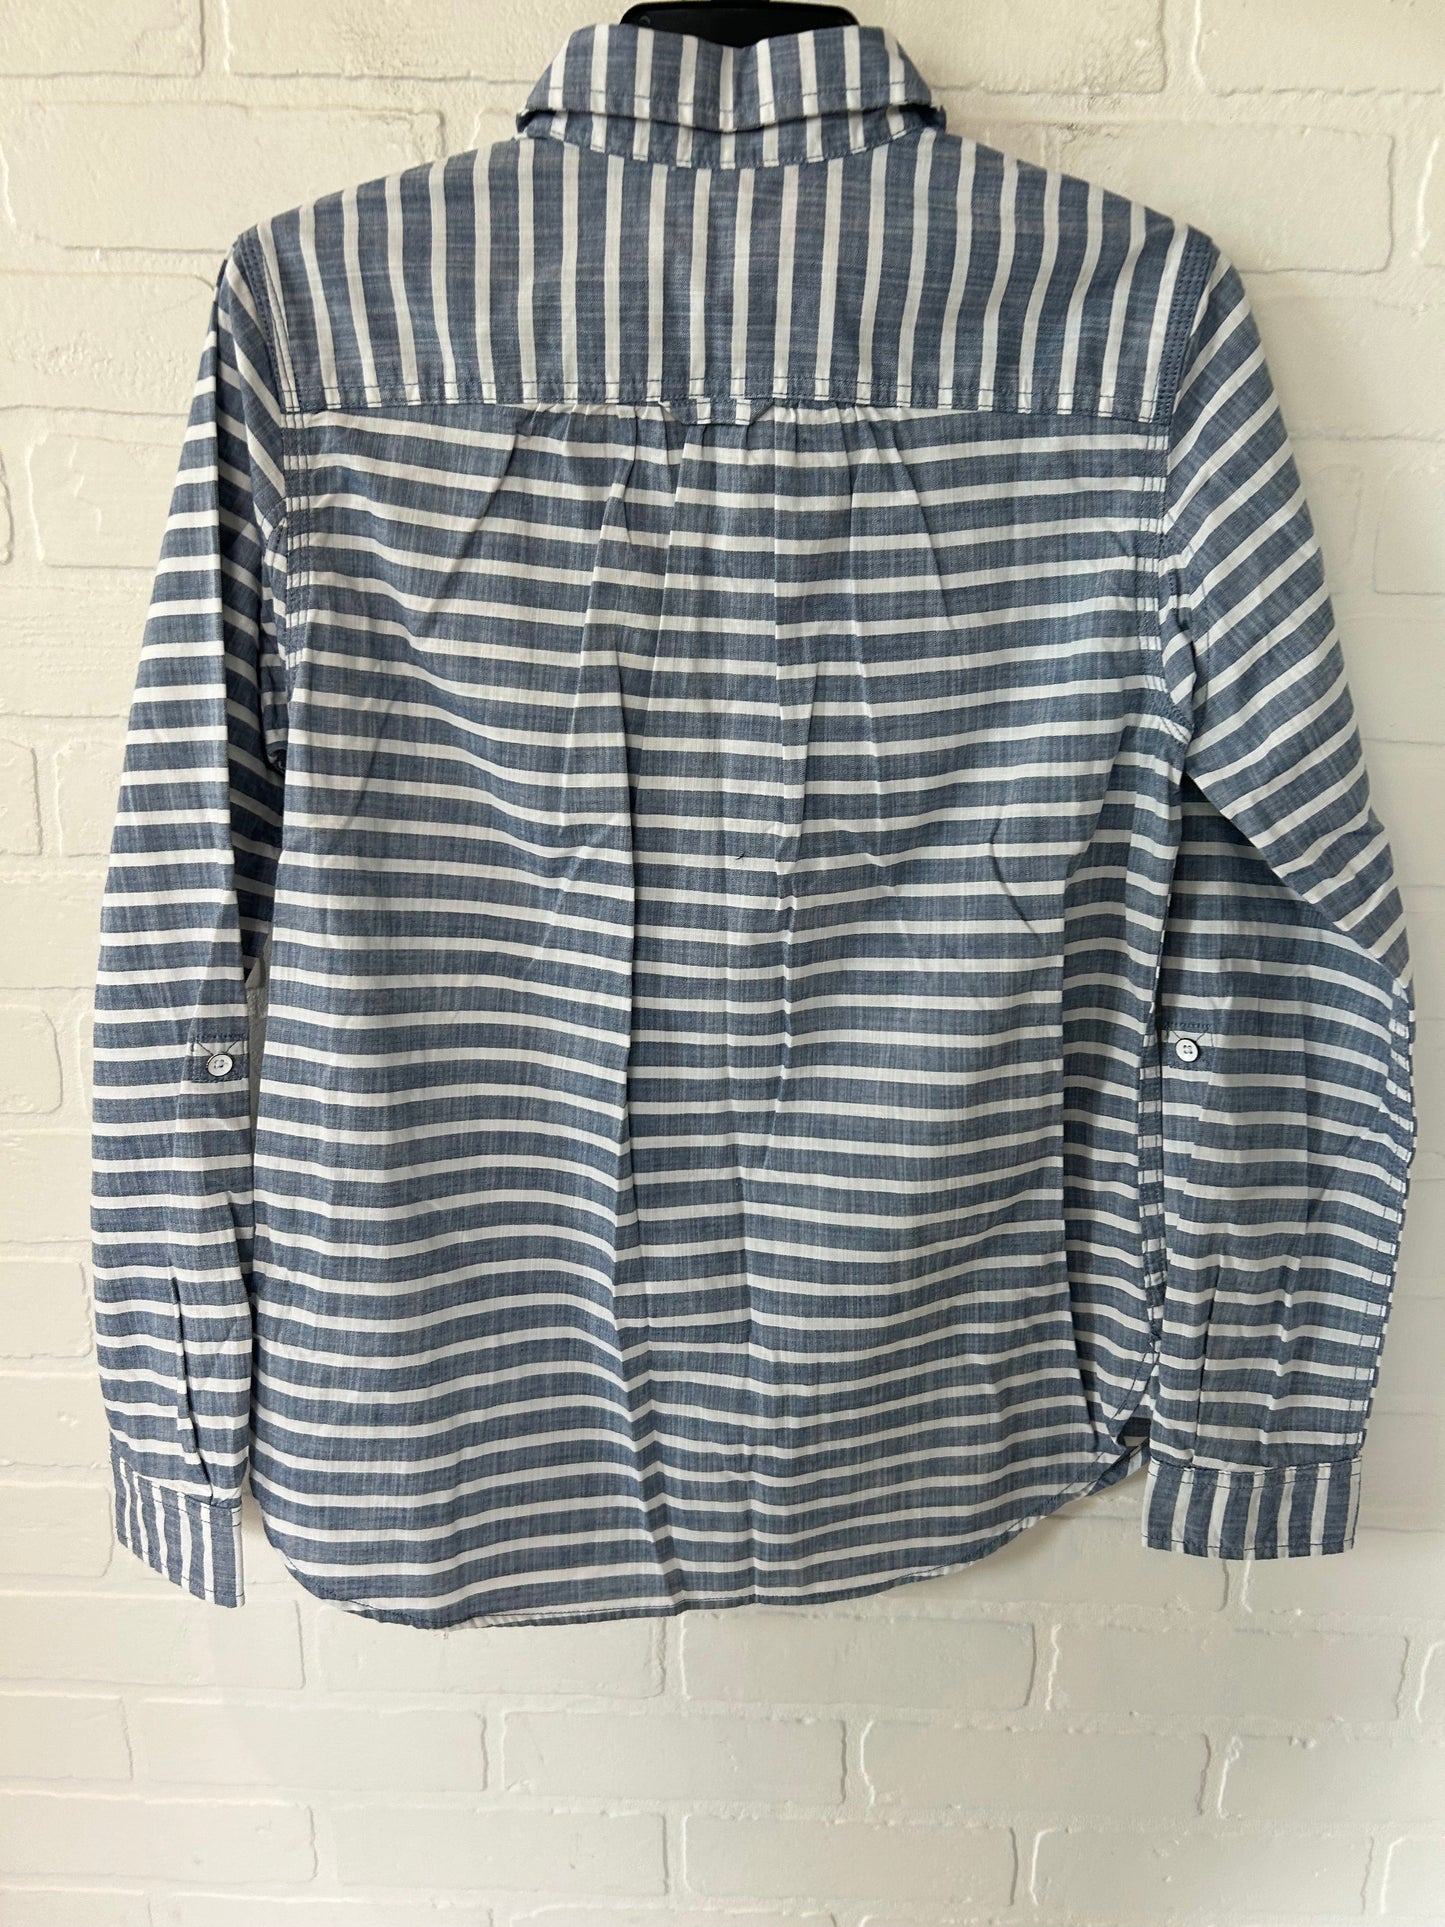 Blue & White Top Long Sleeve Duluth Trading, Size S